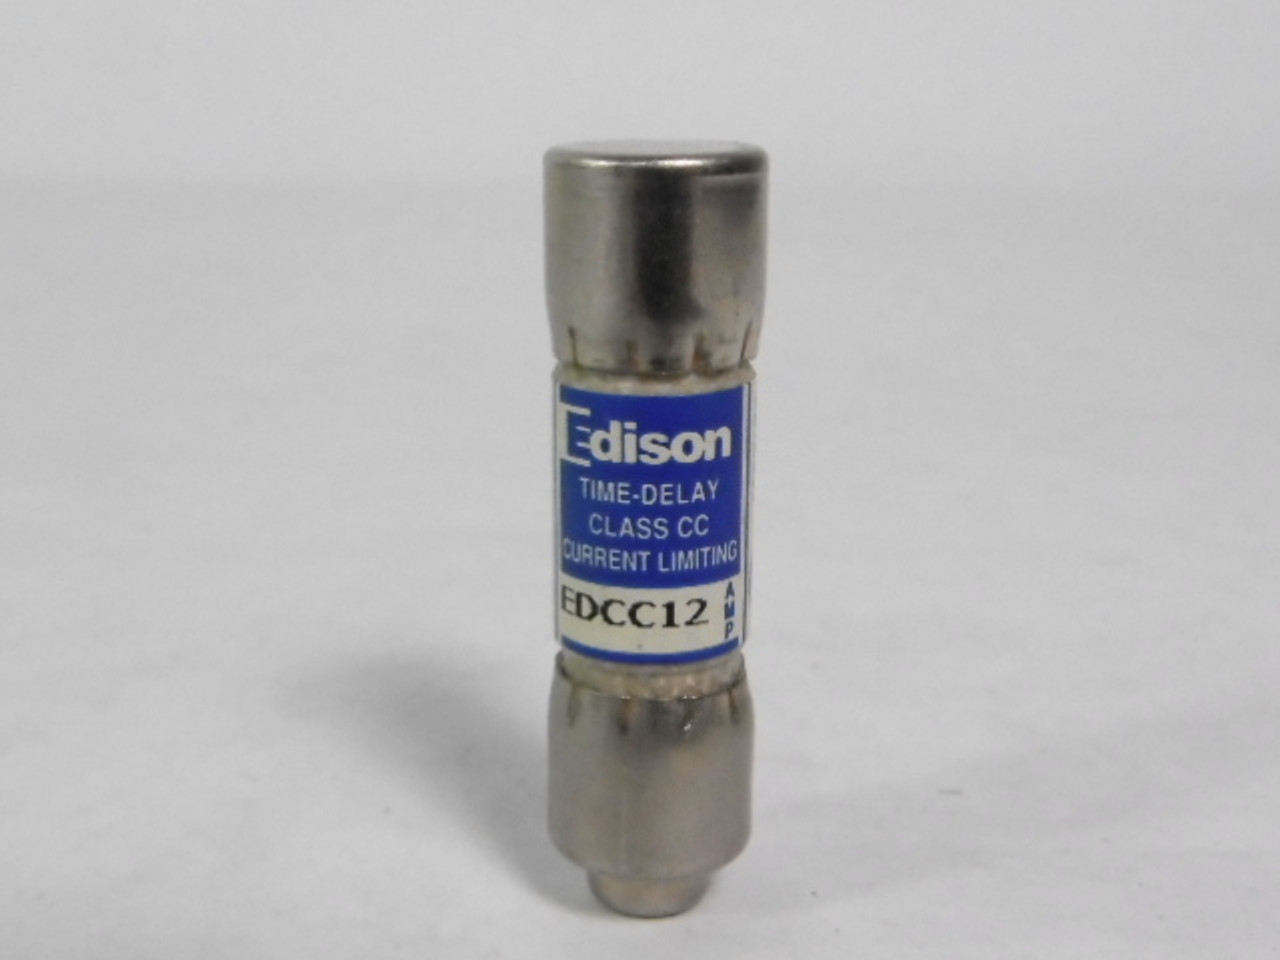 Edison EDCC12 Time Delay Current Limiting Fuse 12A 600V USED